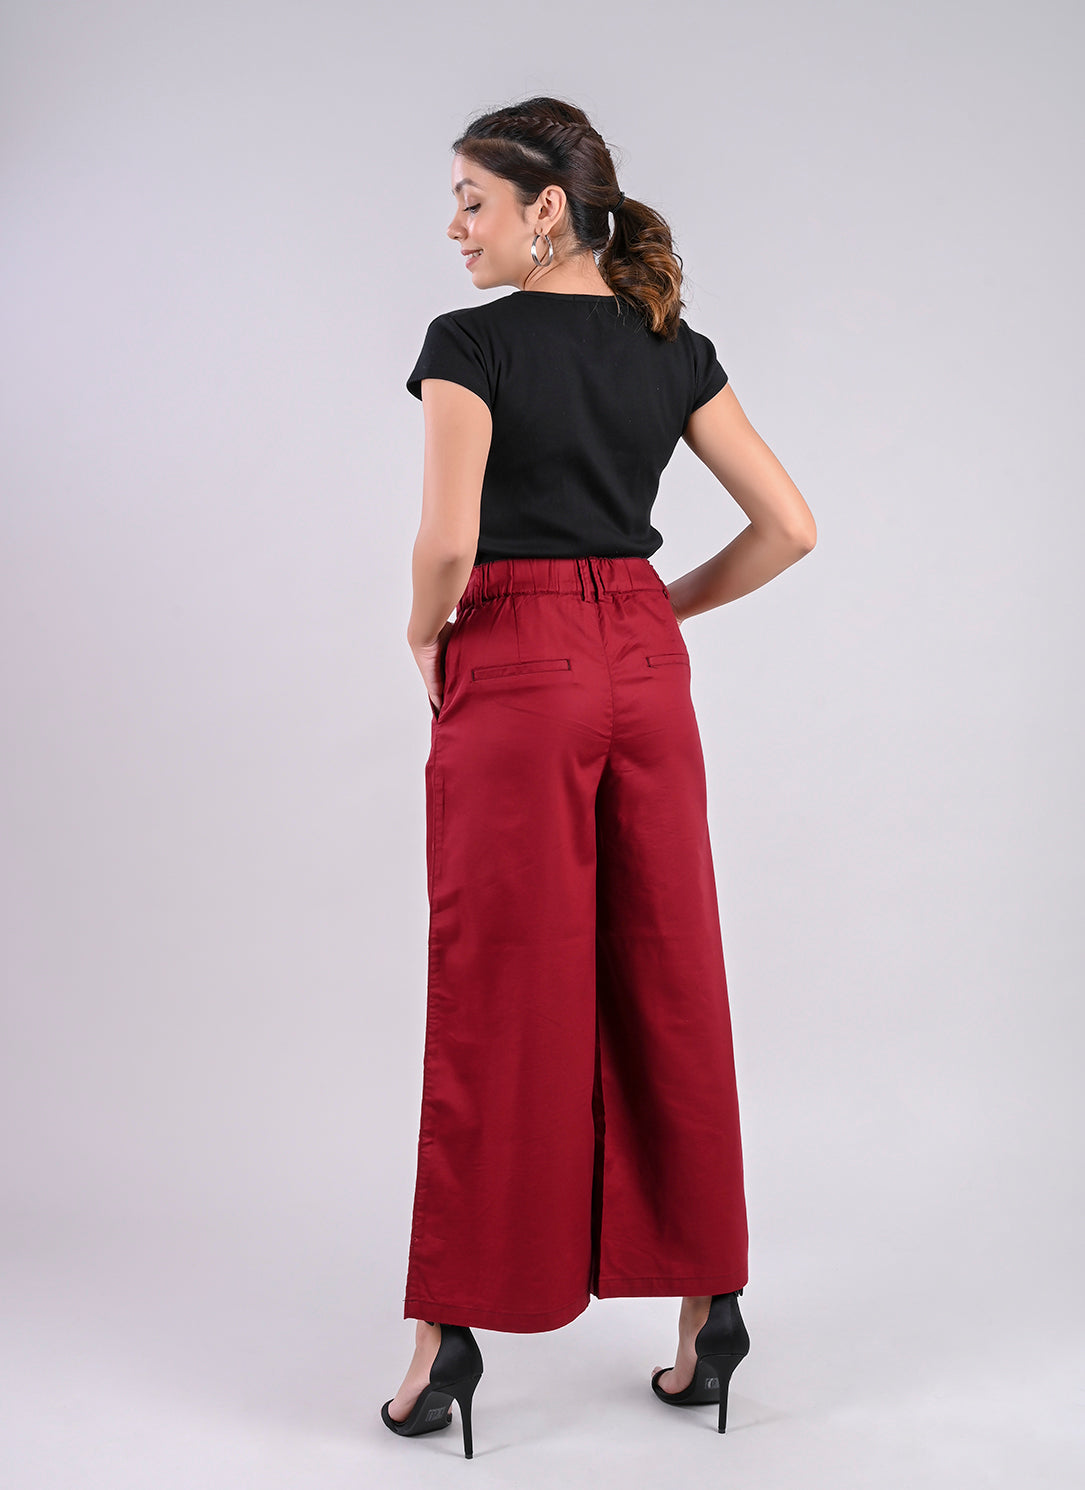 PLEATED PALAZZO PANTS IN PUMPKIN SPICE